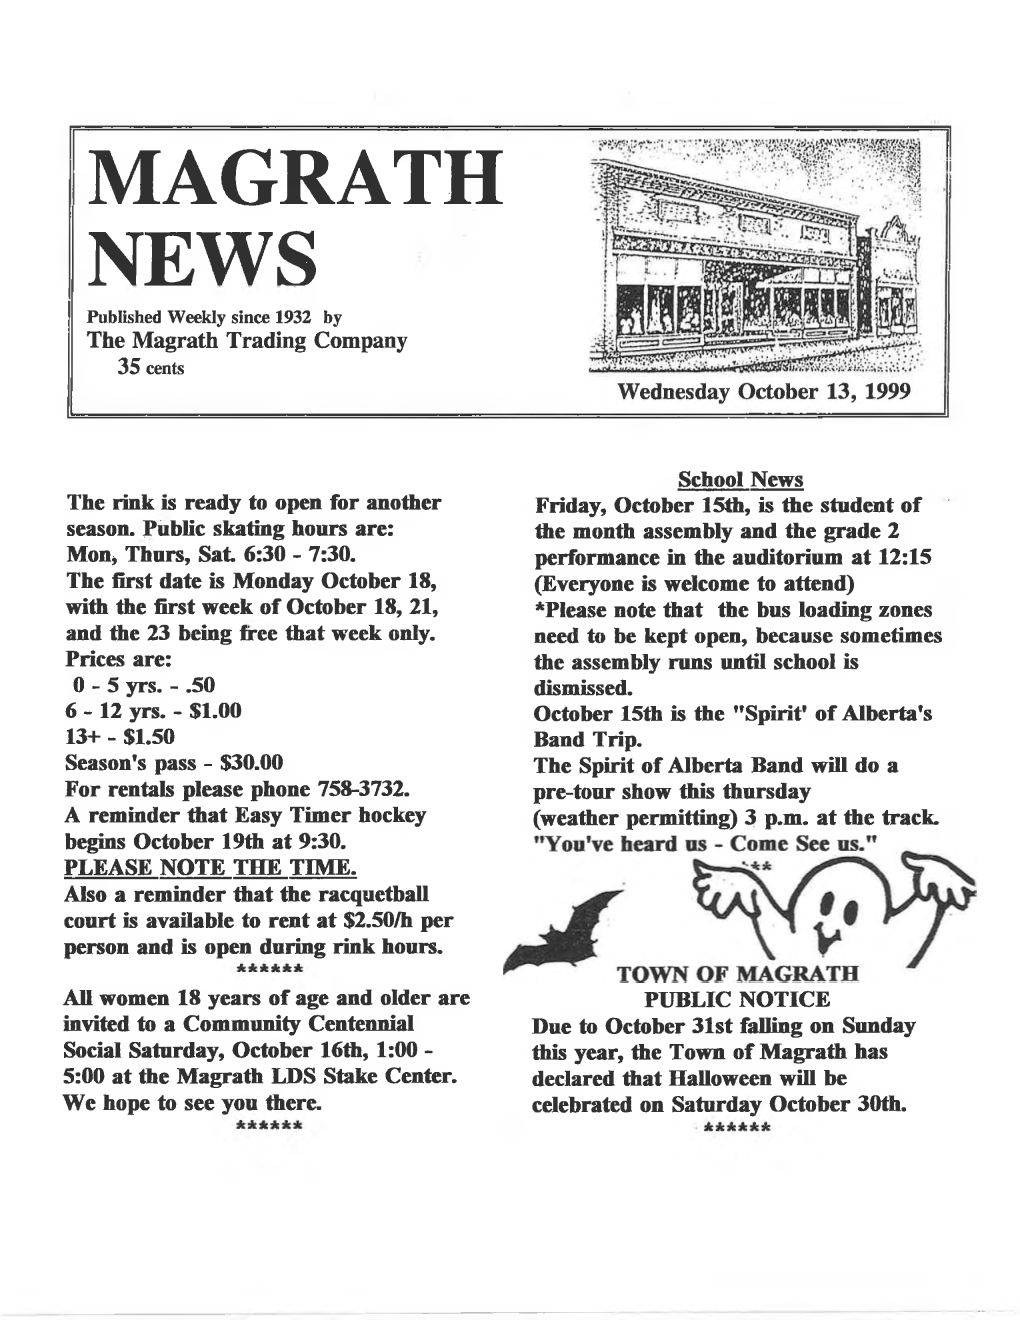 MAGRATH NEWS Published Weekly Since 1932 by the Magrath Trading Company 35 Cents